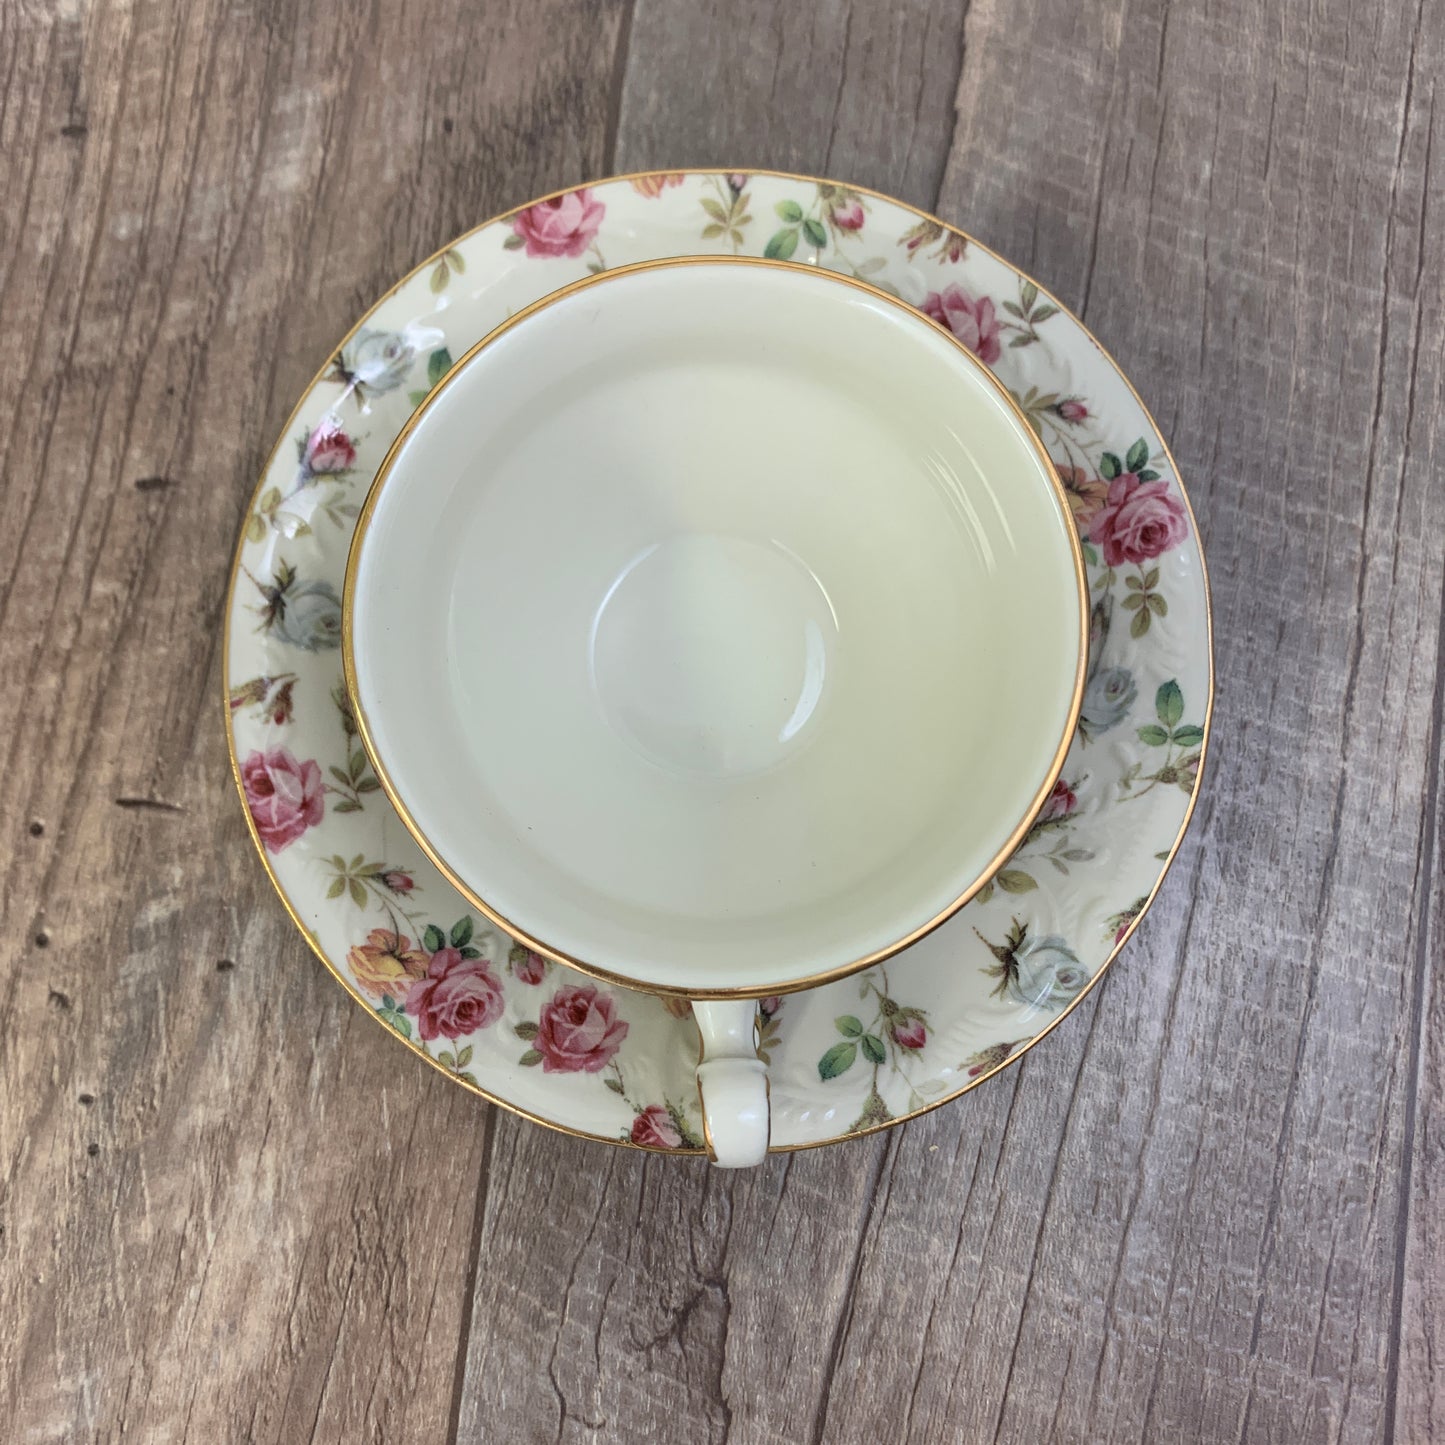 Victorian Trading Co Wide Mouth Teacup and Saucer Rose Chintz Pattern